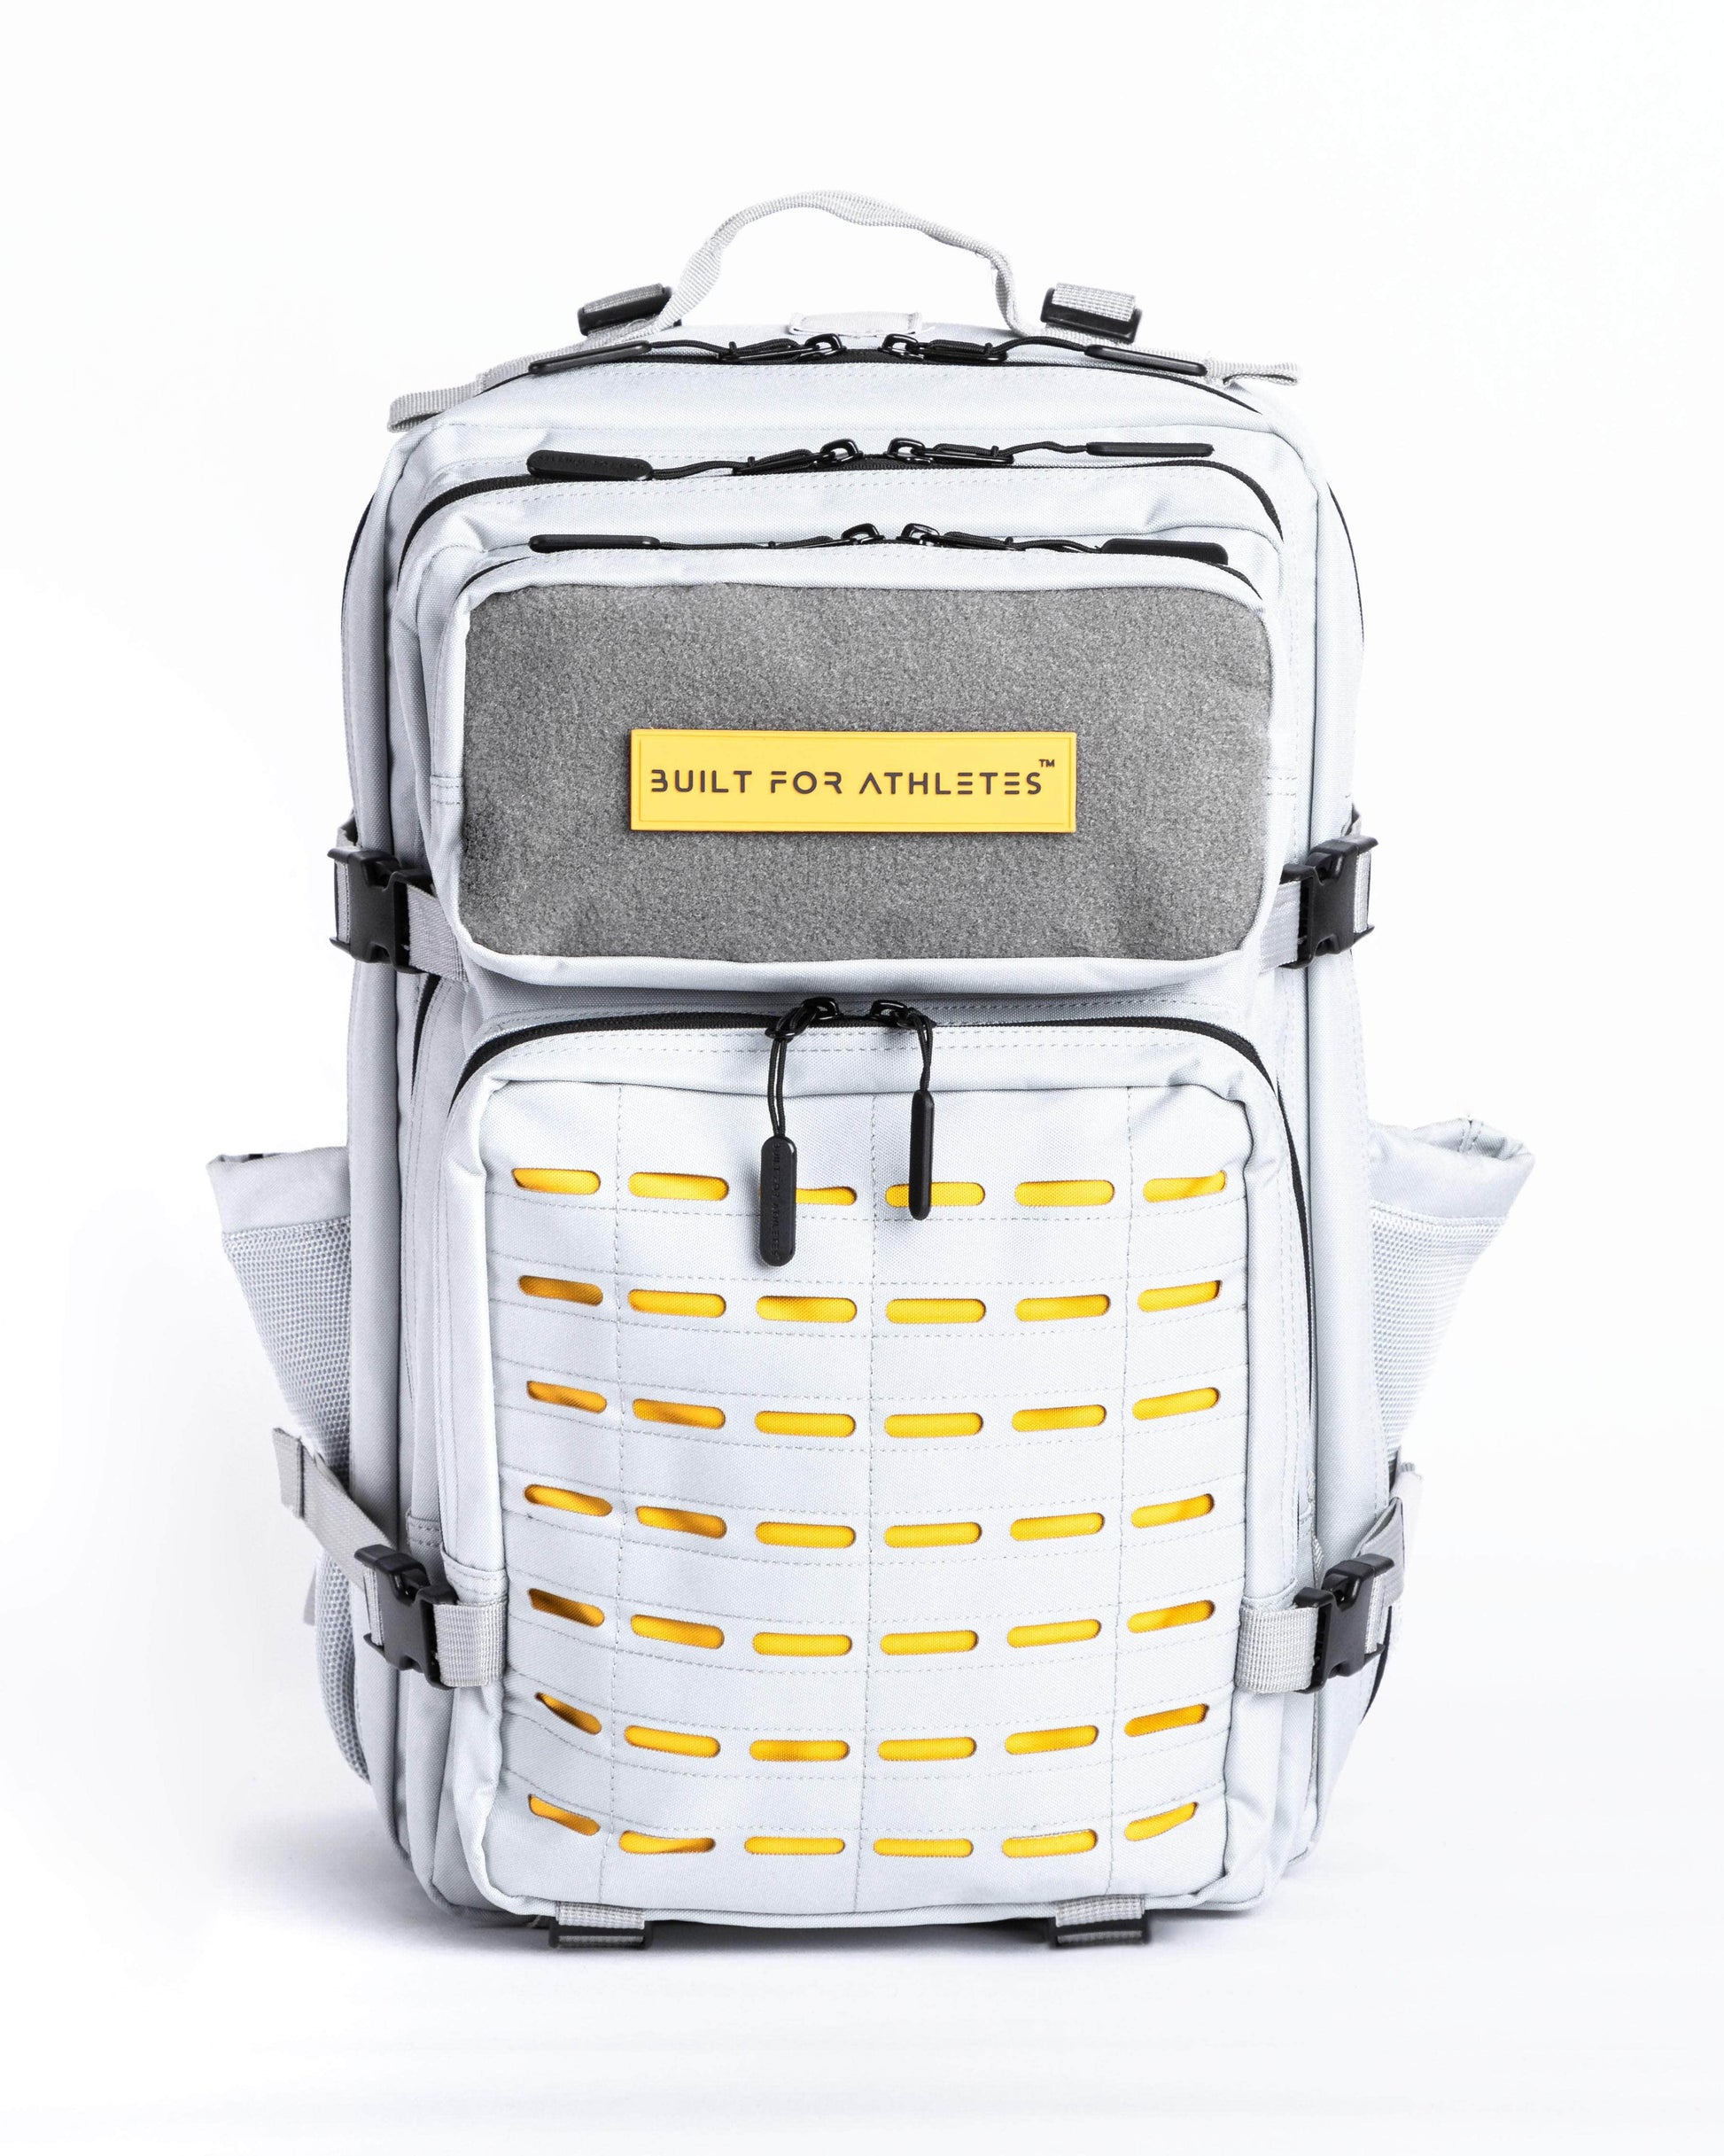 Built for Athletes Backpacks Large Grey & Yellow Gym Backpack